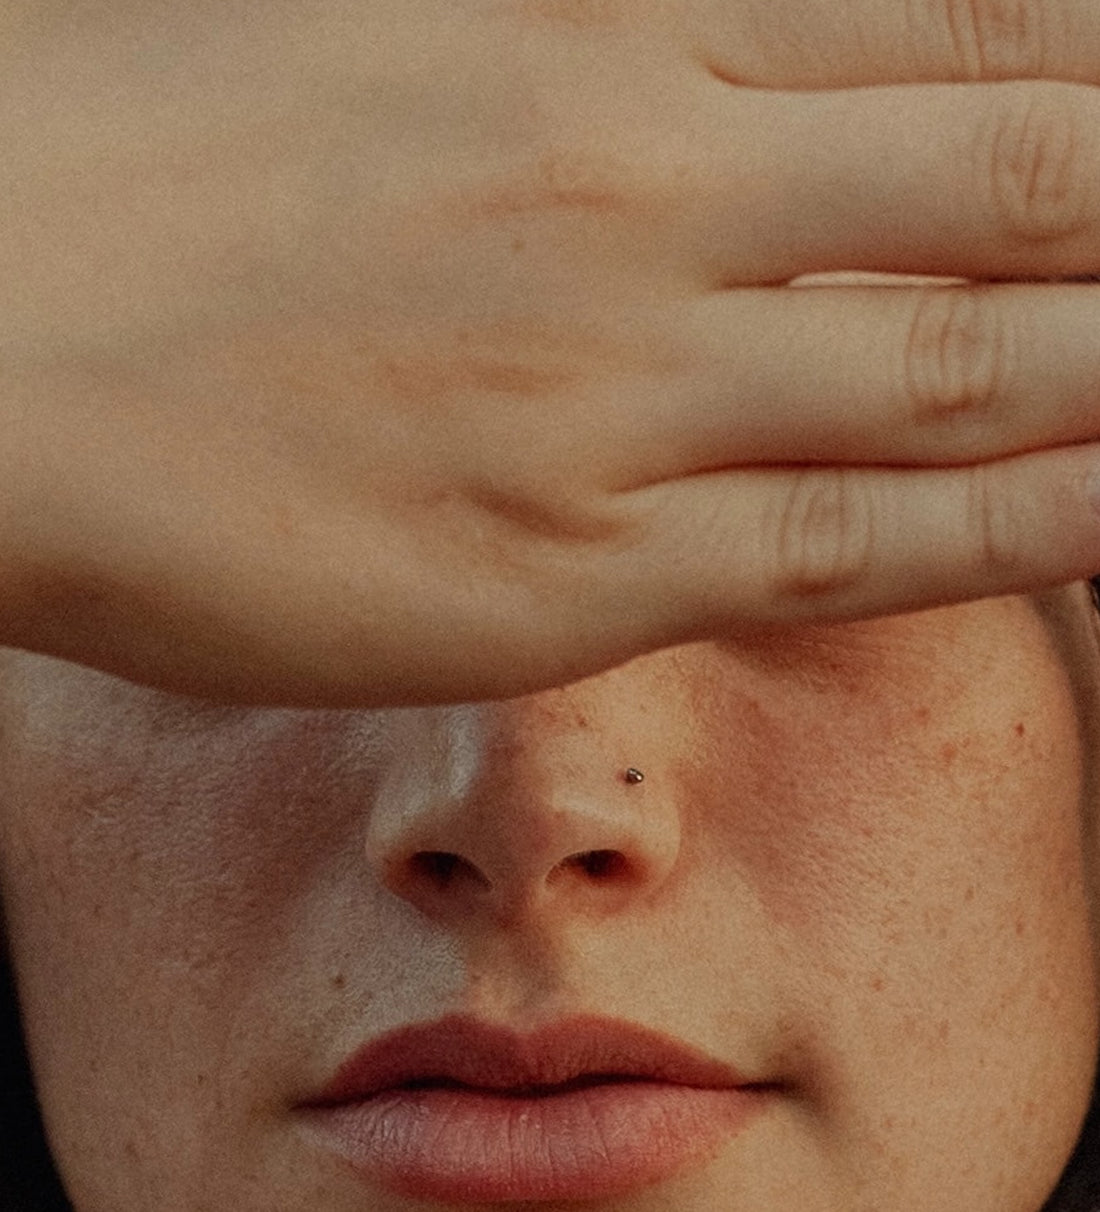 The back of a hand covering the up part of a white womans face